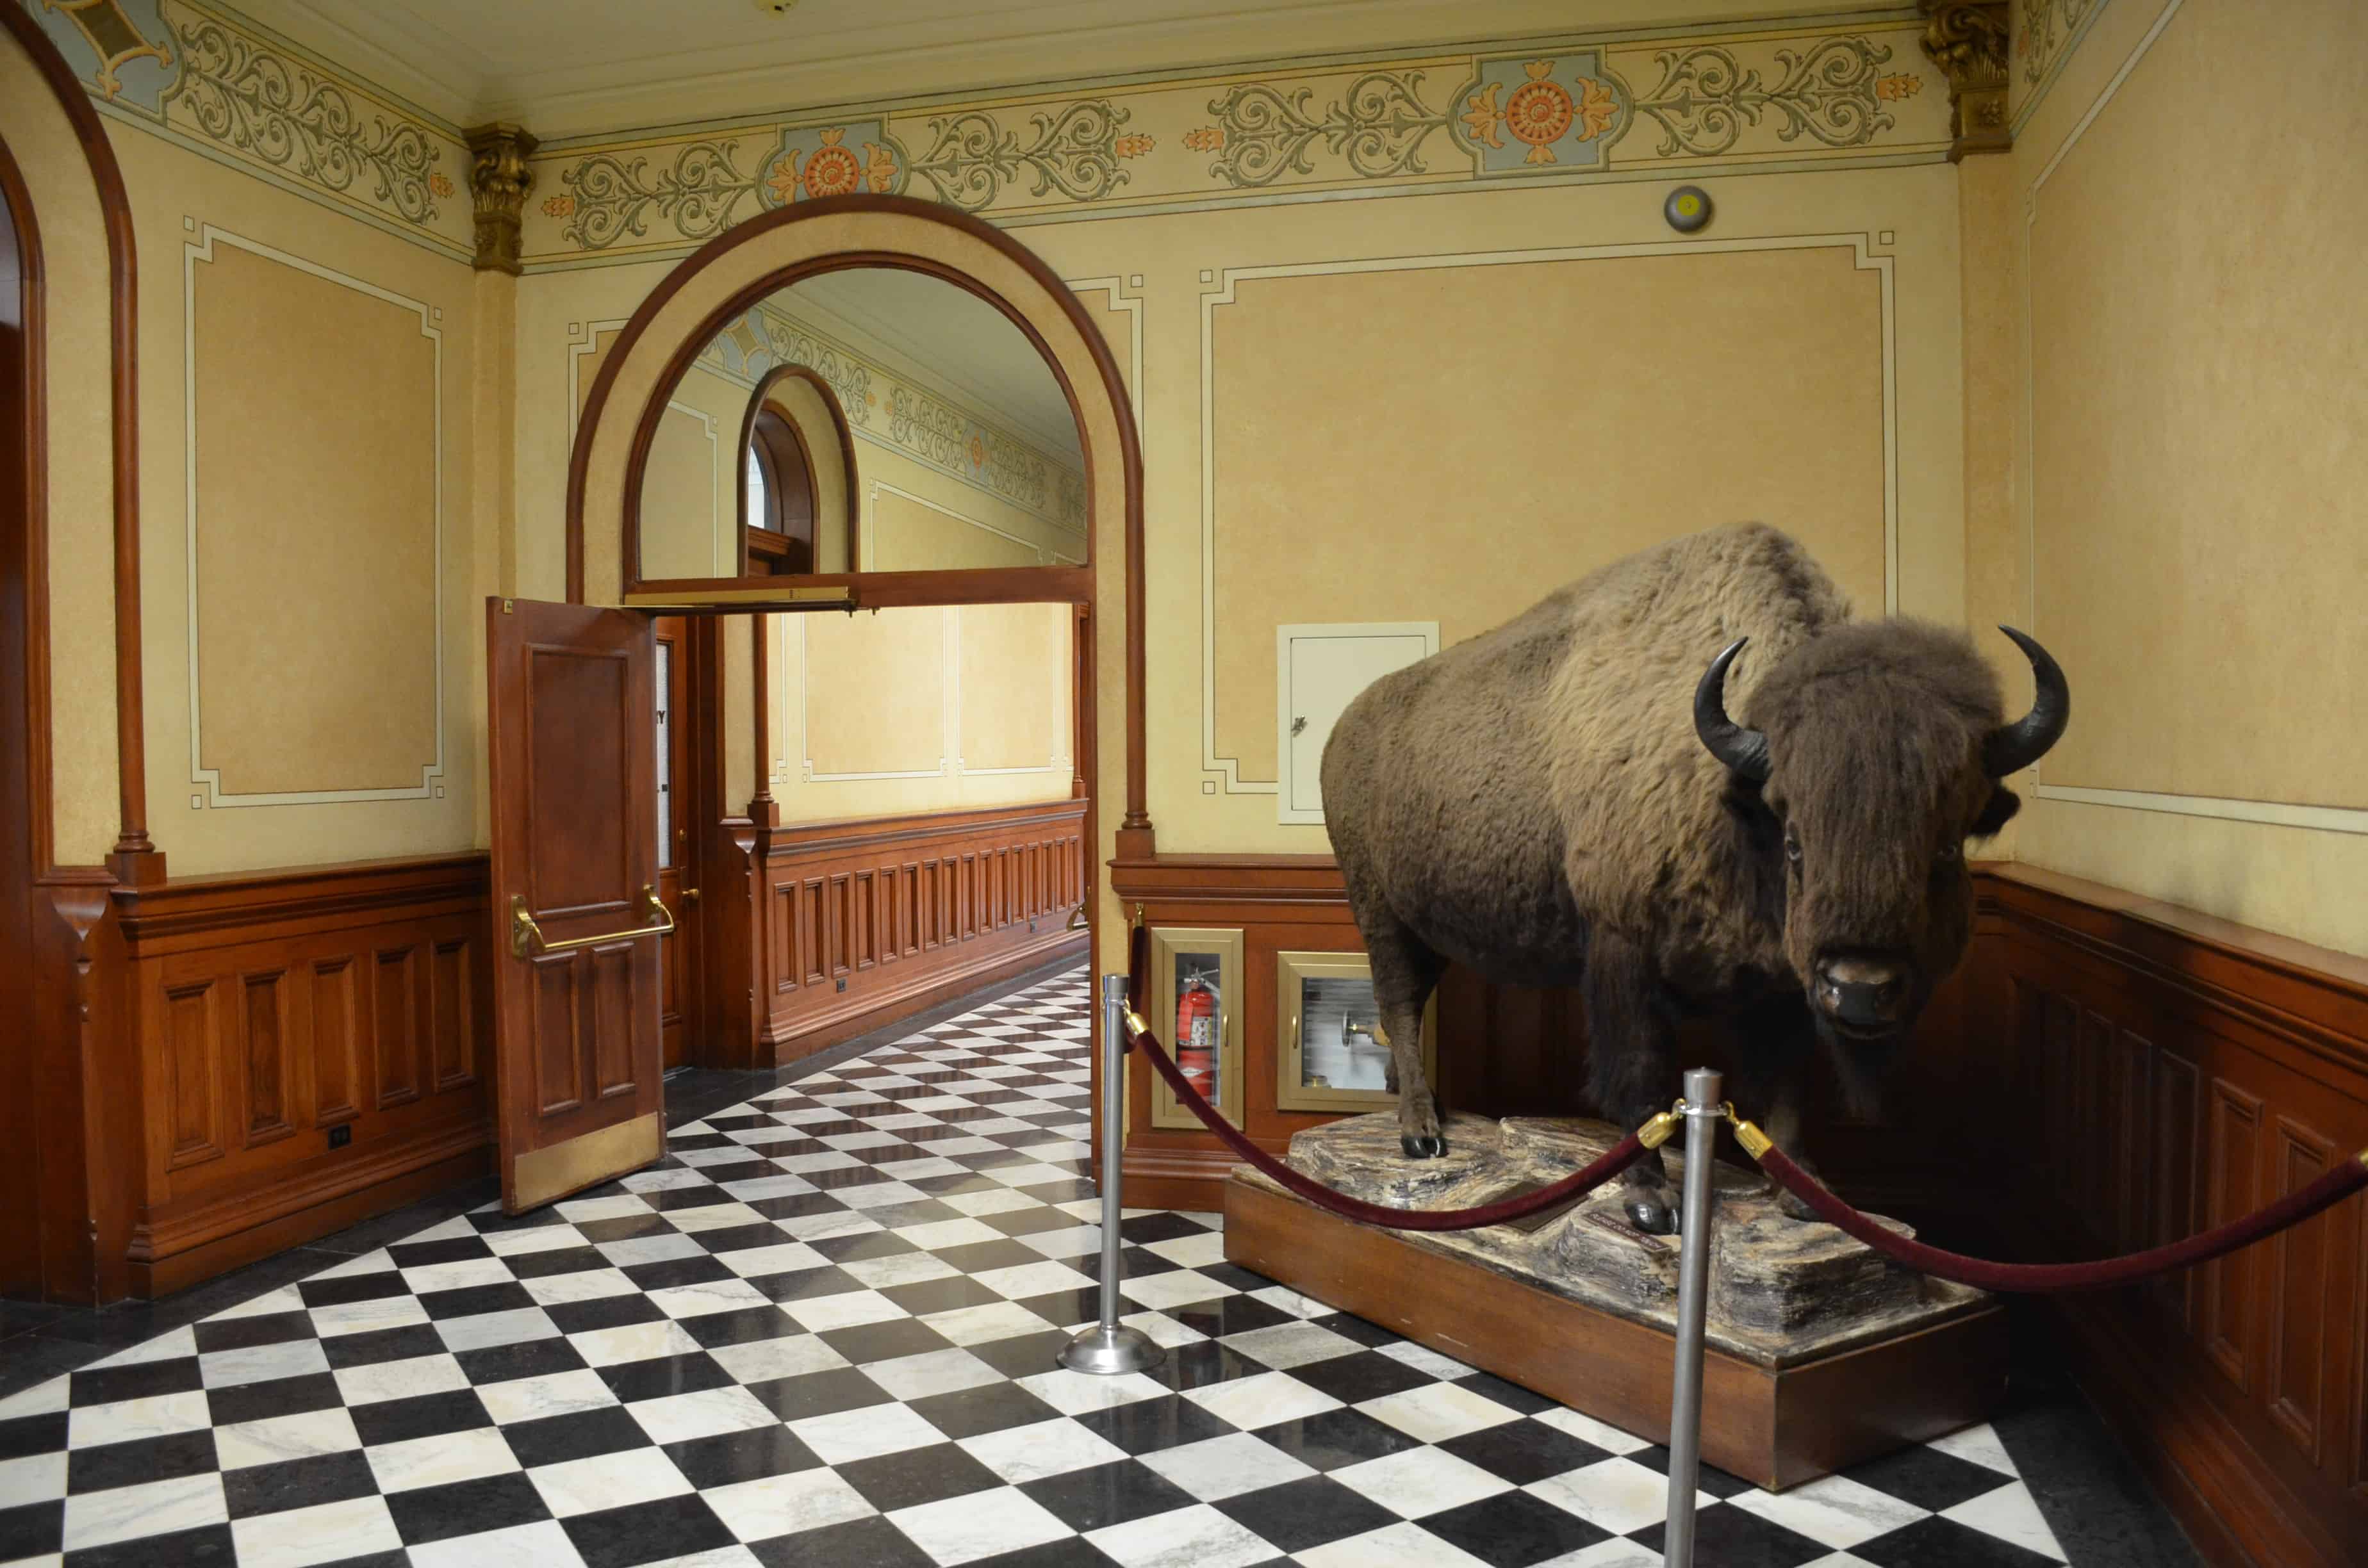 Bison at the Wyoming State Capitol in Cheyenne